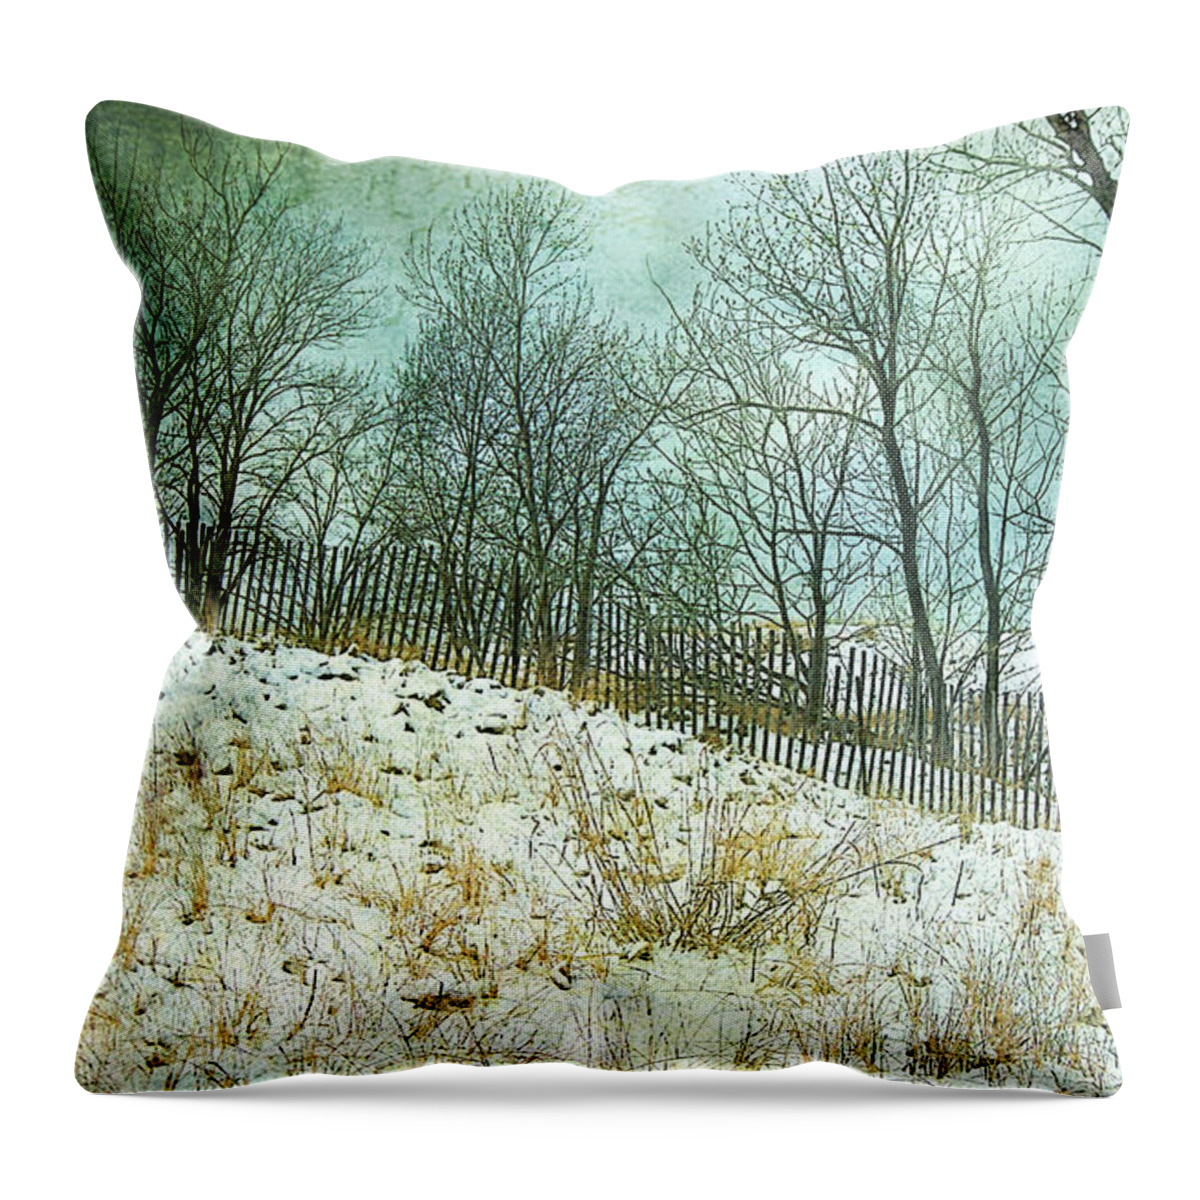 Dune Throw Pillow featuring the photograph Snow Fence Beach Dune by Kathi Mirto